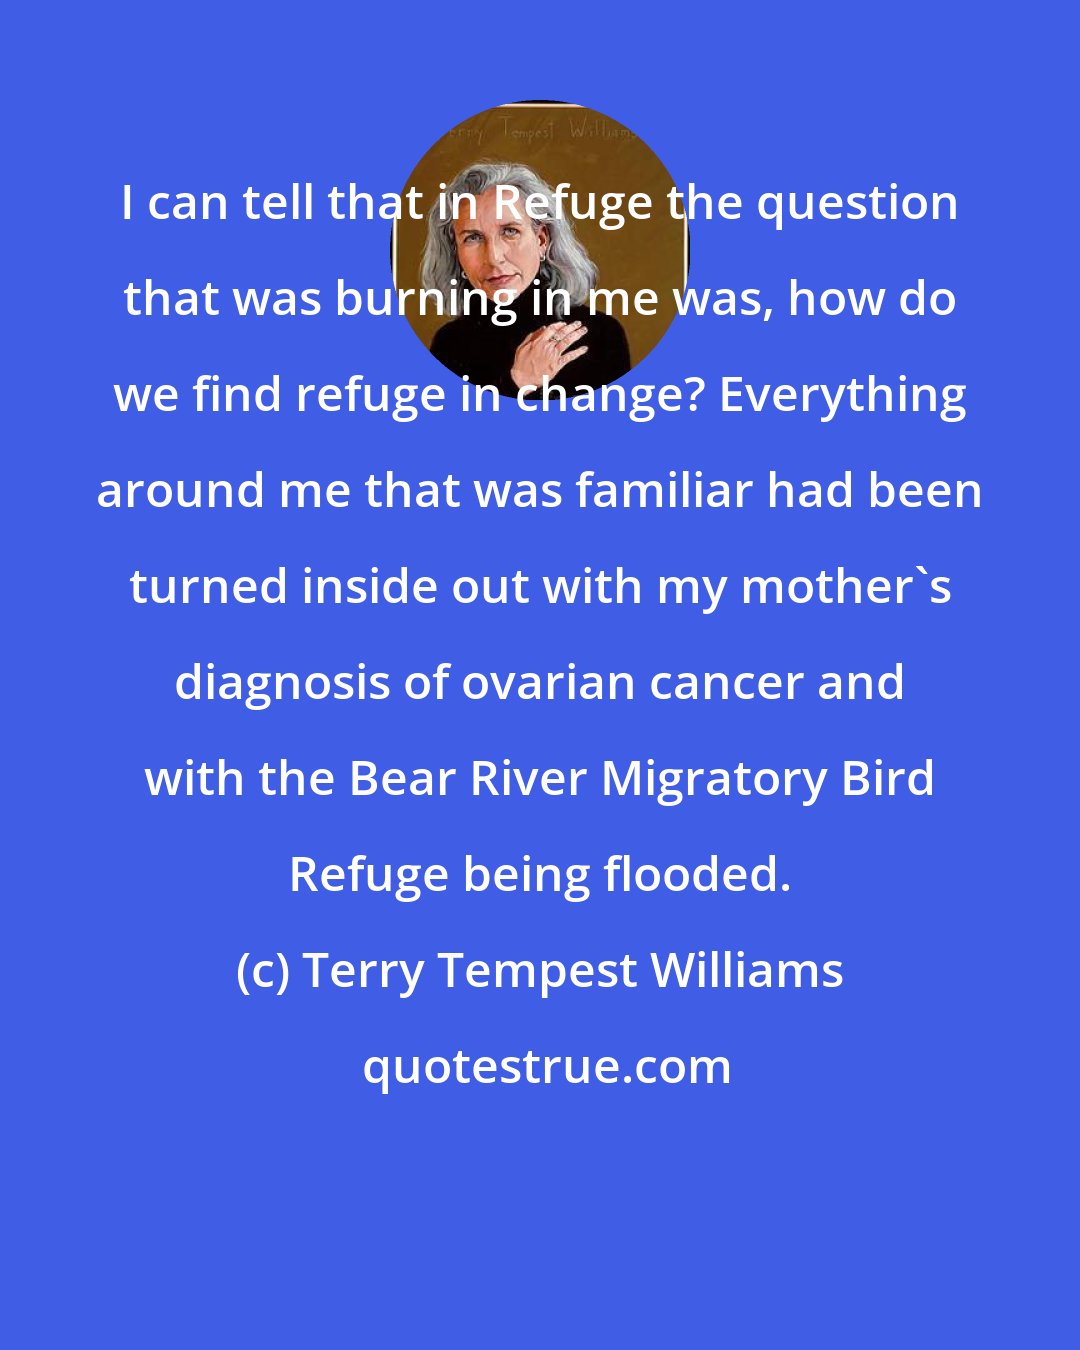 Terry Tempest Williams: I can tell that in Refuge the question that was burning in me was, how do we find refuge in change? Everything around me that was familiar had been turned inside out with my mother's diagnosis of ovarian cancer and with the Bear River Migratory Bird Refuge being flooded.